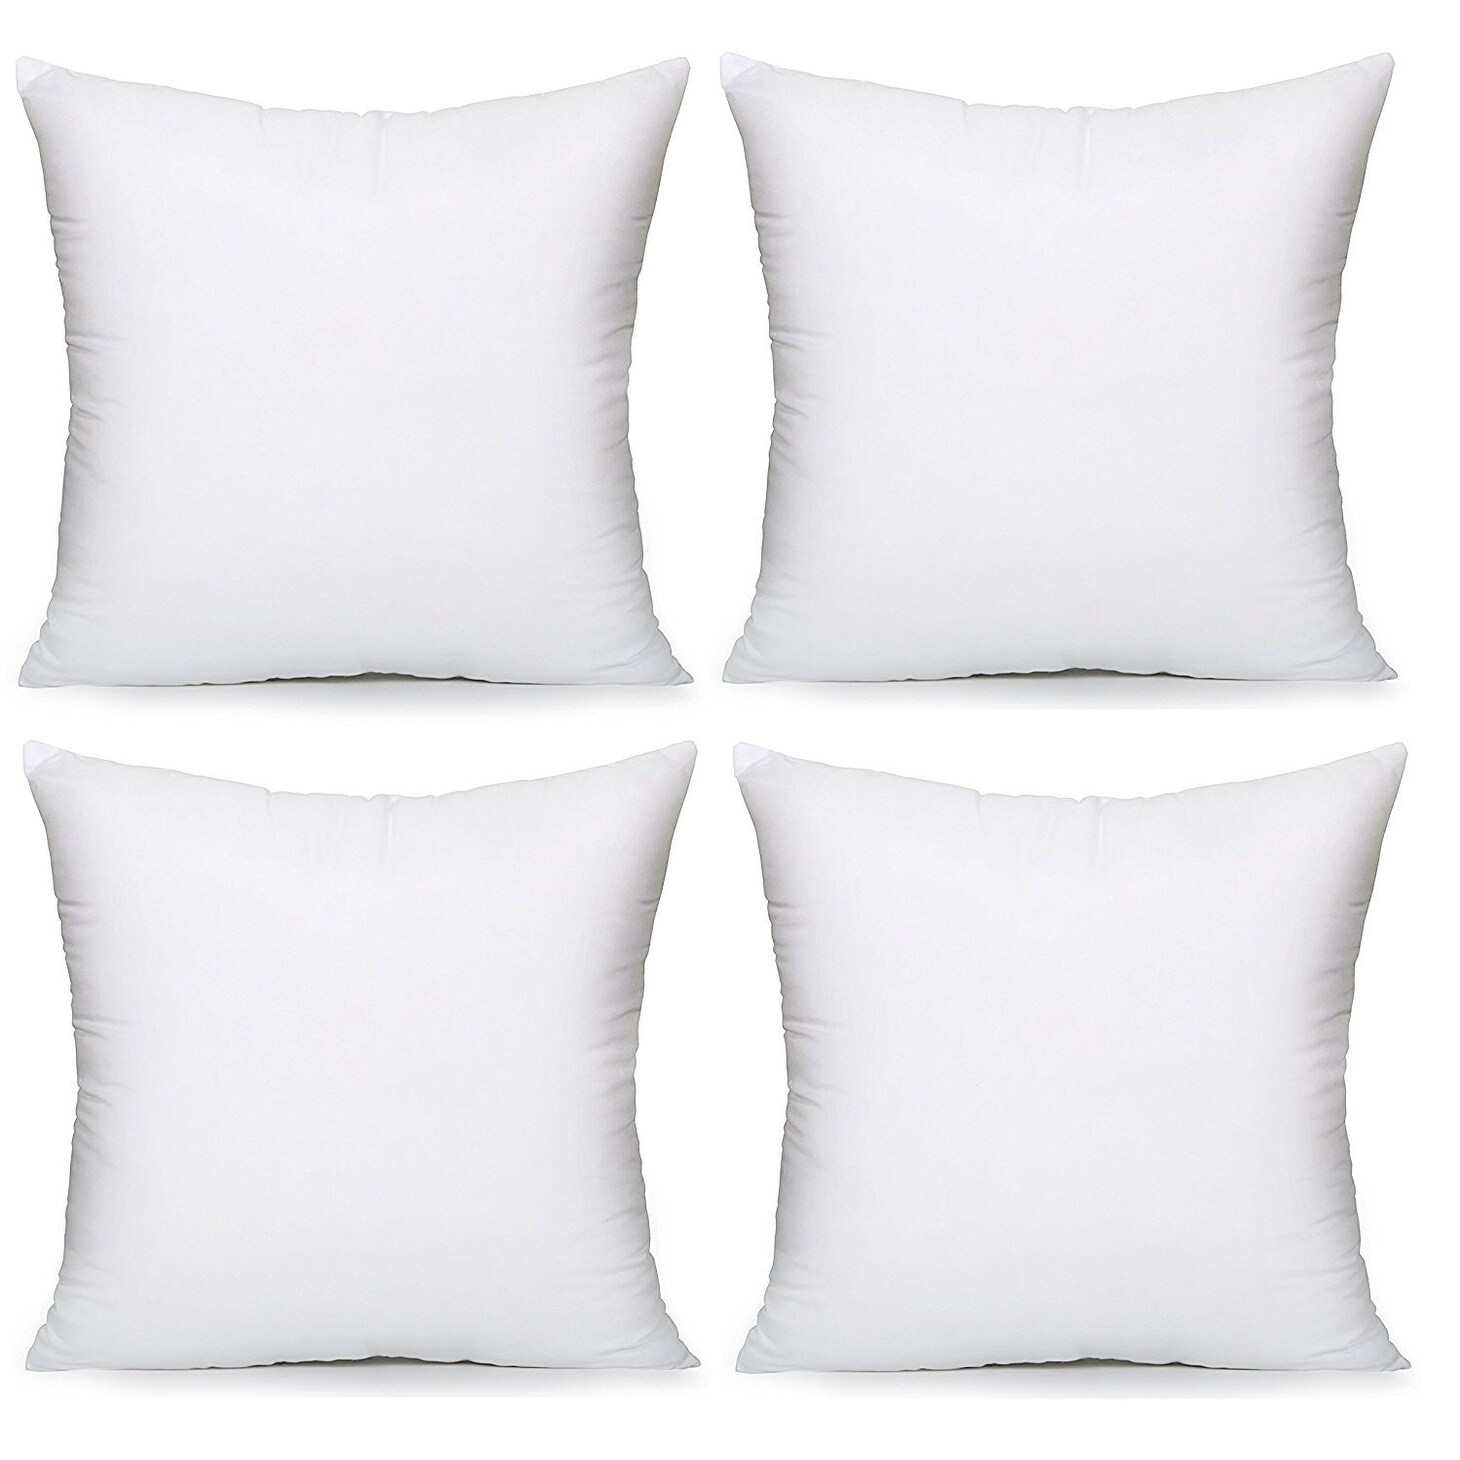 https://ak1.ostkcdn.com/images/products/is/images/direct/3a62b15a191ae804c26f46b55ee6bdb4d73f61ac/Hypoallergenic-Pillow-Insert-Form-Cushion%2C-18%22-L-x-18%22-W%2C-Pack-of-4.jpg